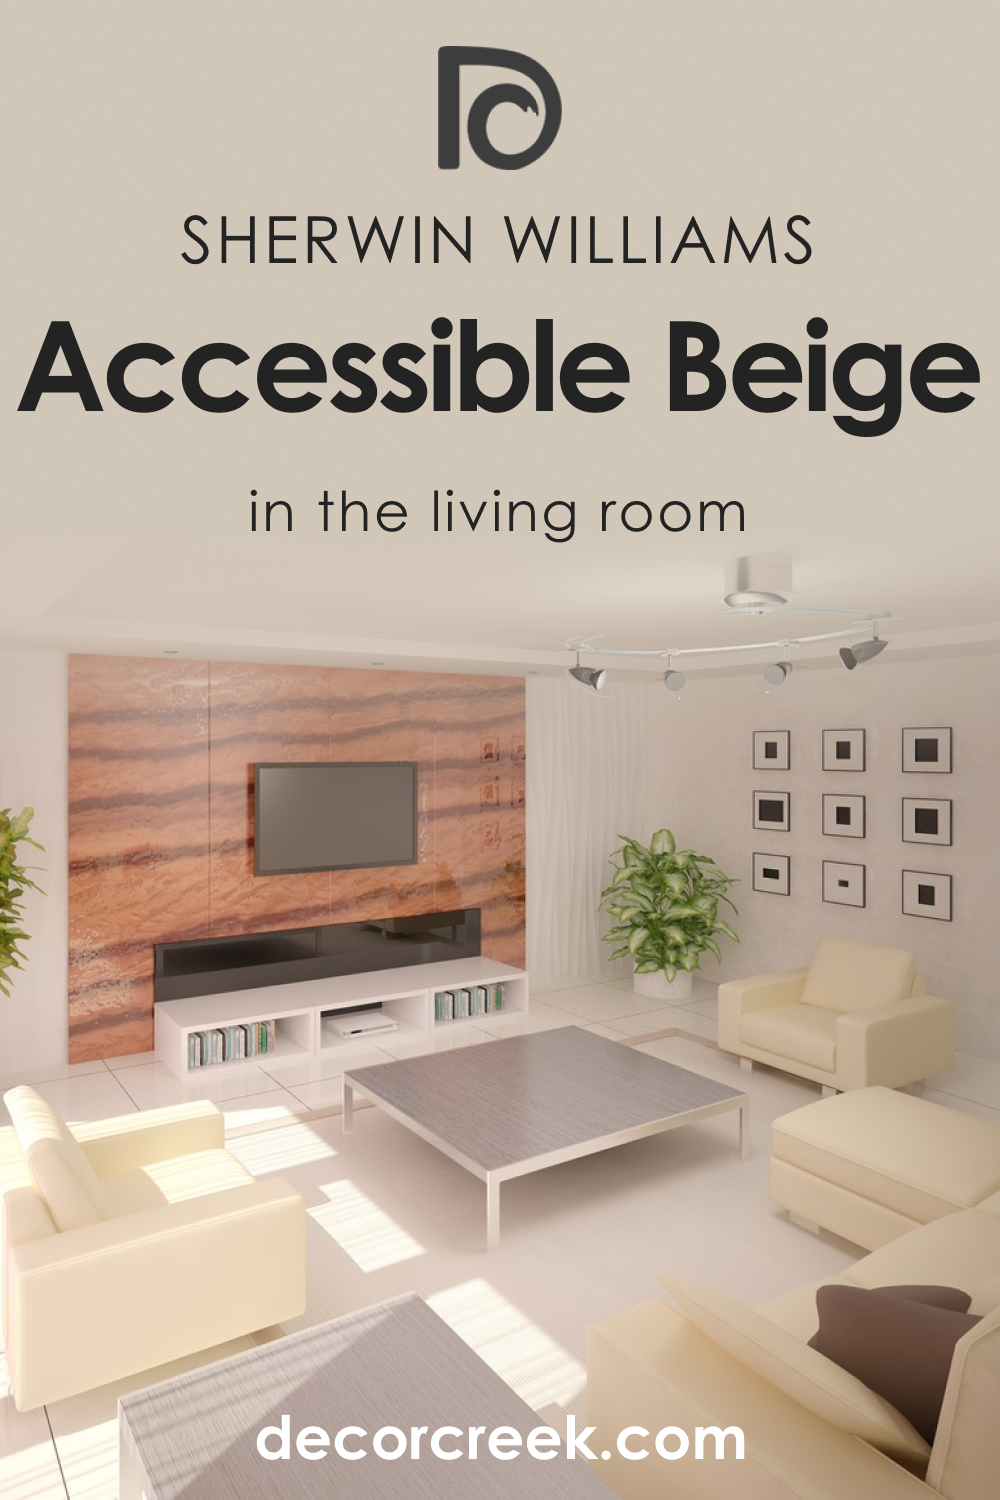 How to Use Accessible Beige SW 7036 in the Living Room?